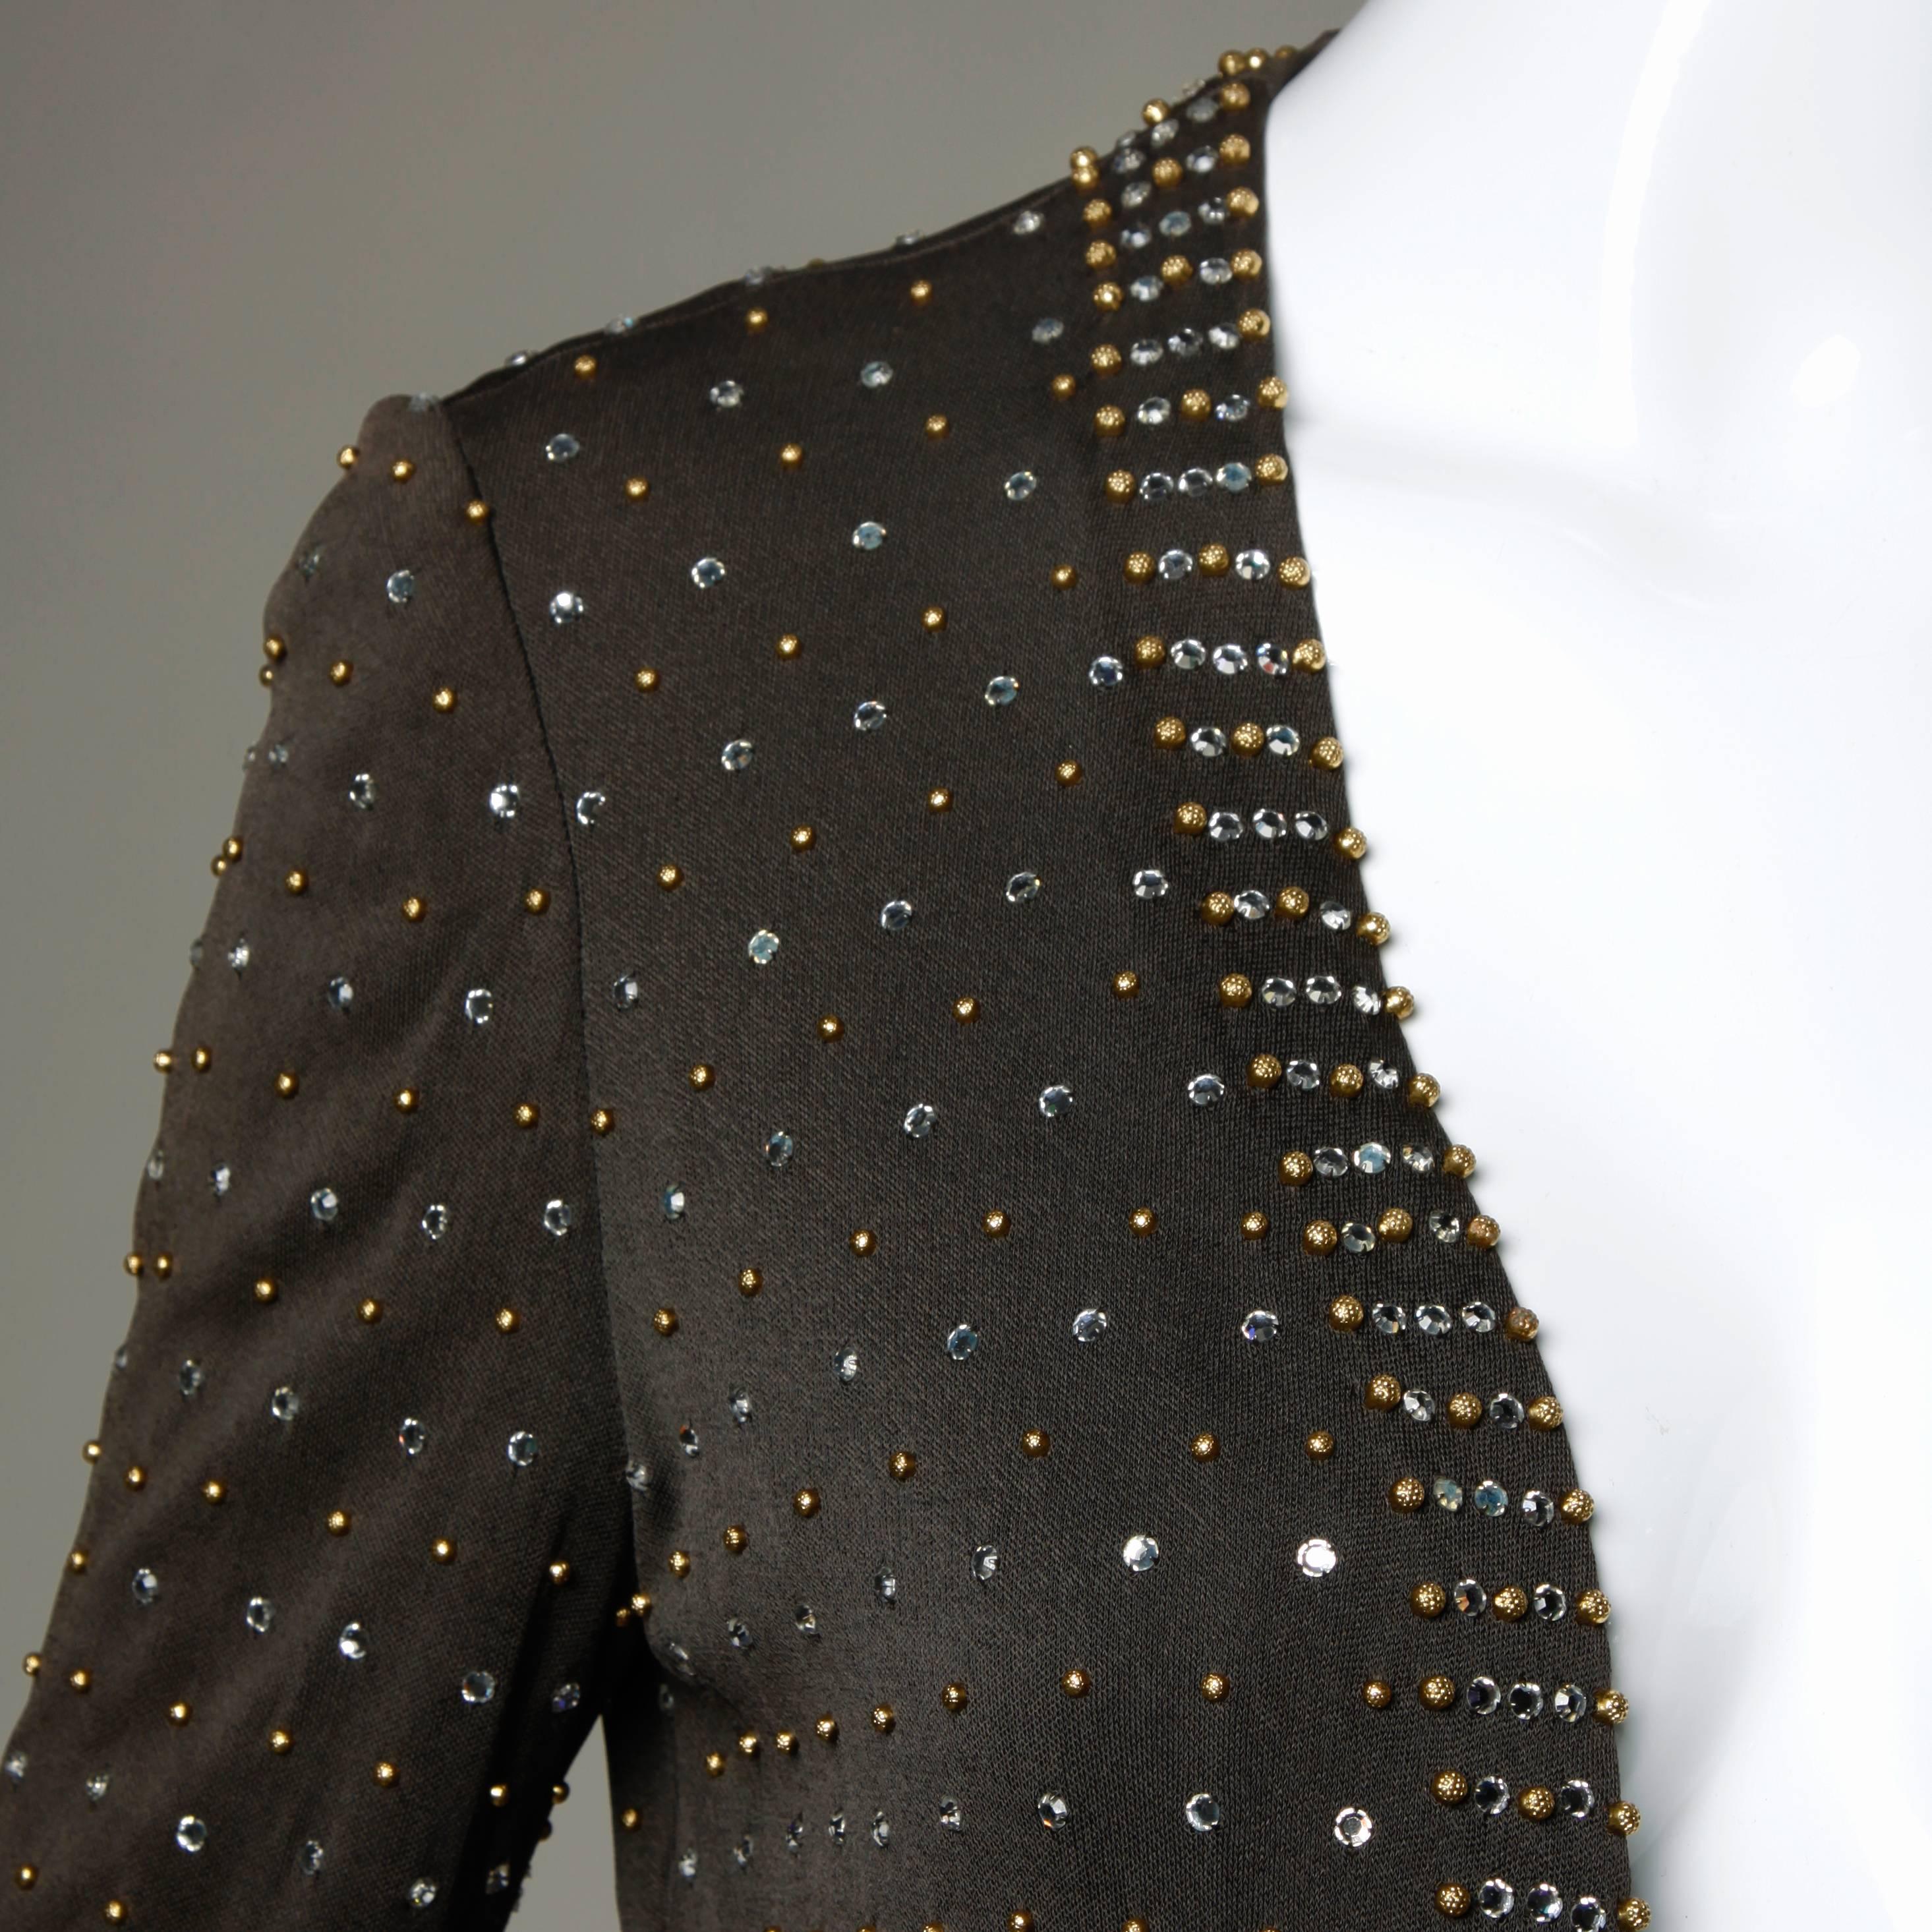 Stunning heavily beaded and rhinestone embellished silk jersey jacket by Adele Simpson. Heavy crystal rhinestones and hand beadwork!

Details:

Fully Lined
Marked Size: Not Marked
Estimated Size: S-M
Color: Dark Taupe/ Gold/ Crystal 
Fabric: Silk